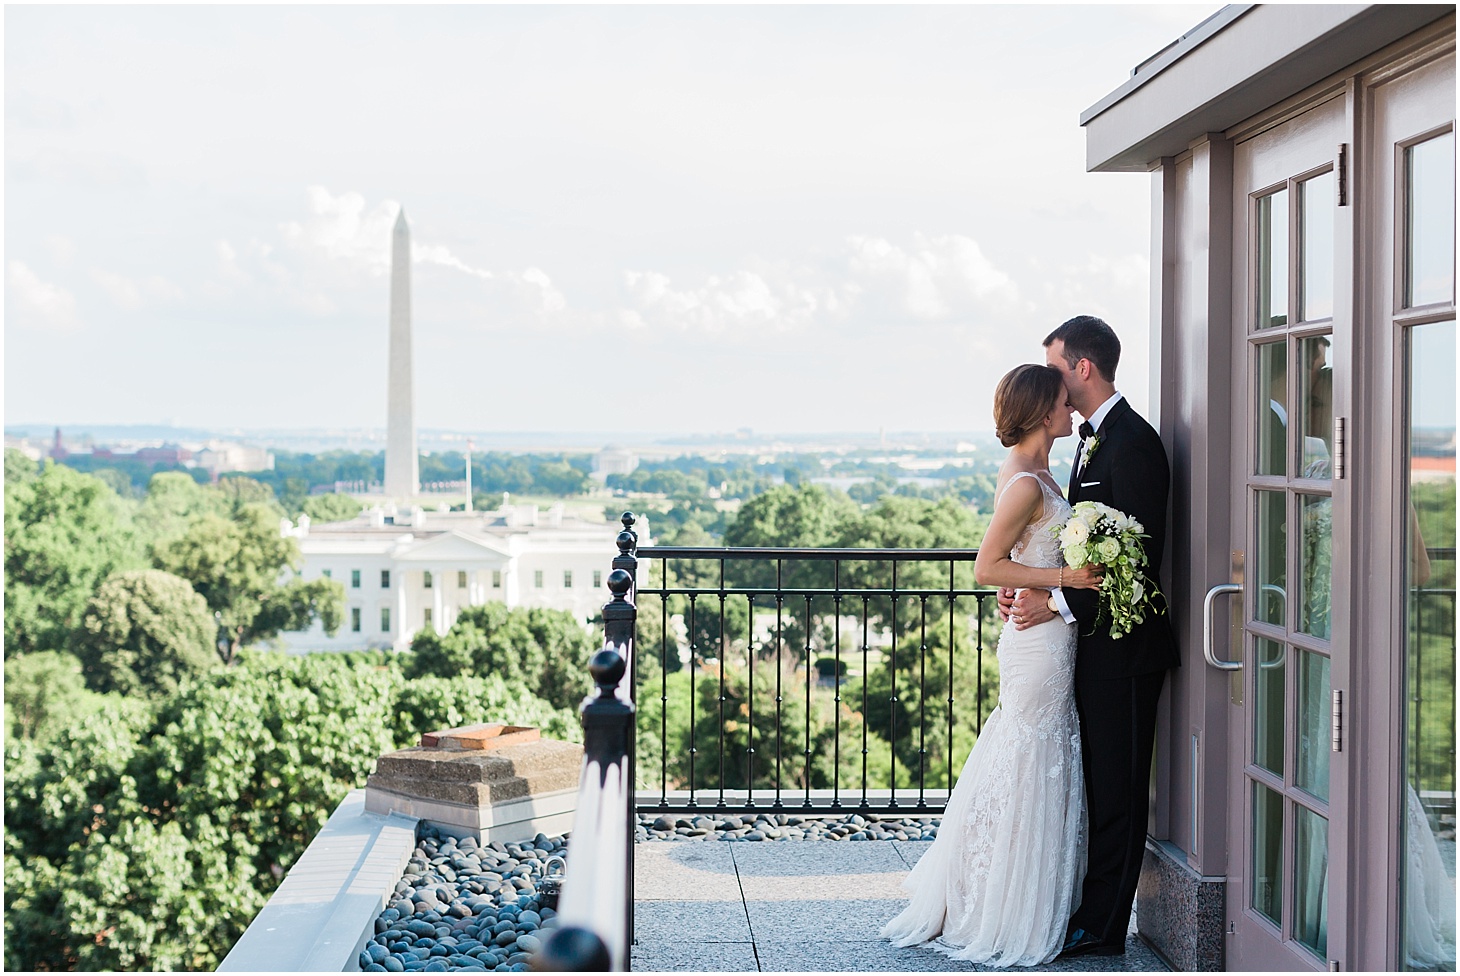 Wedding Portraits Overlooking White House at Hay-Adams Hotel, Black Tie Hay-Adams Wedding with Summer Florals, Ceremony at Capitol Hill Baptist Church, Sarah Bradshaw Photography, DC Wedding Photographer